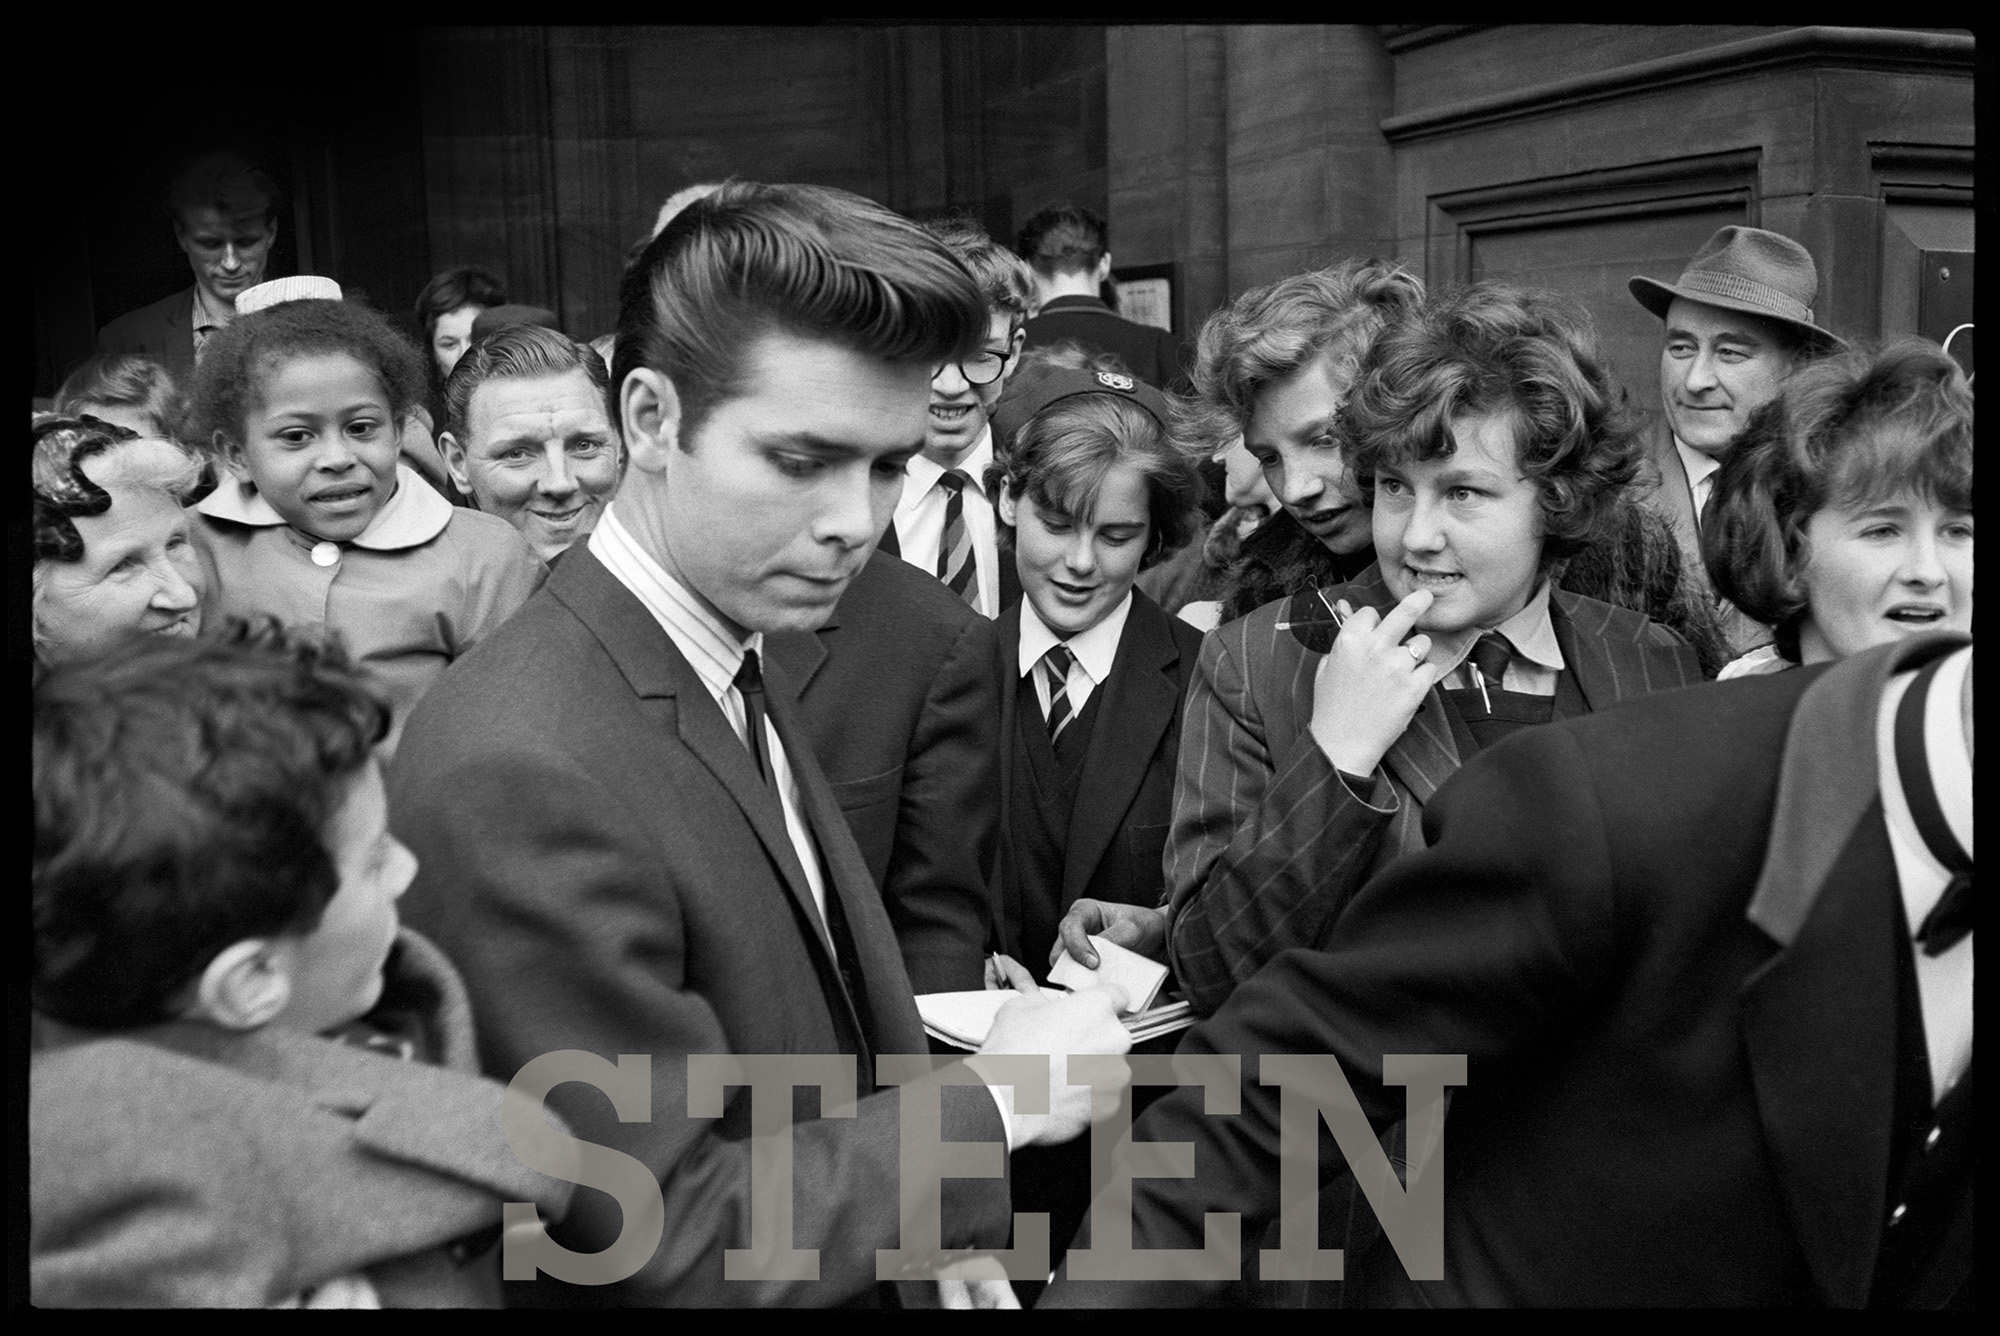 an exclusive limited edition black and white photograph of cliff richard by british photographer david steen